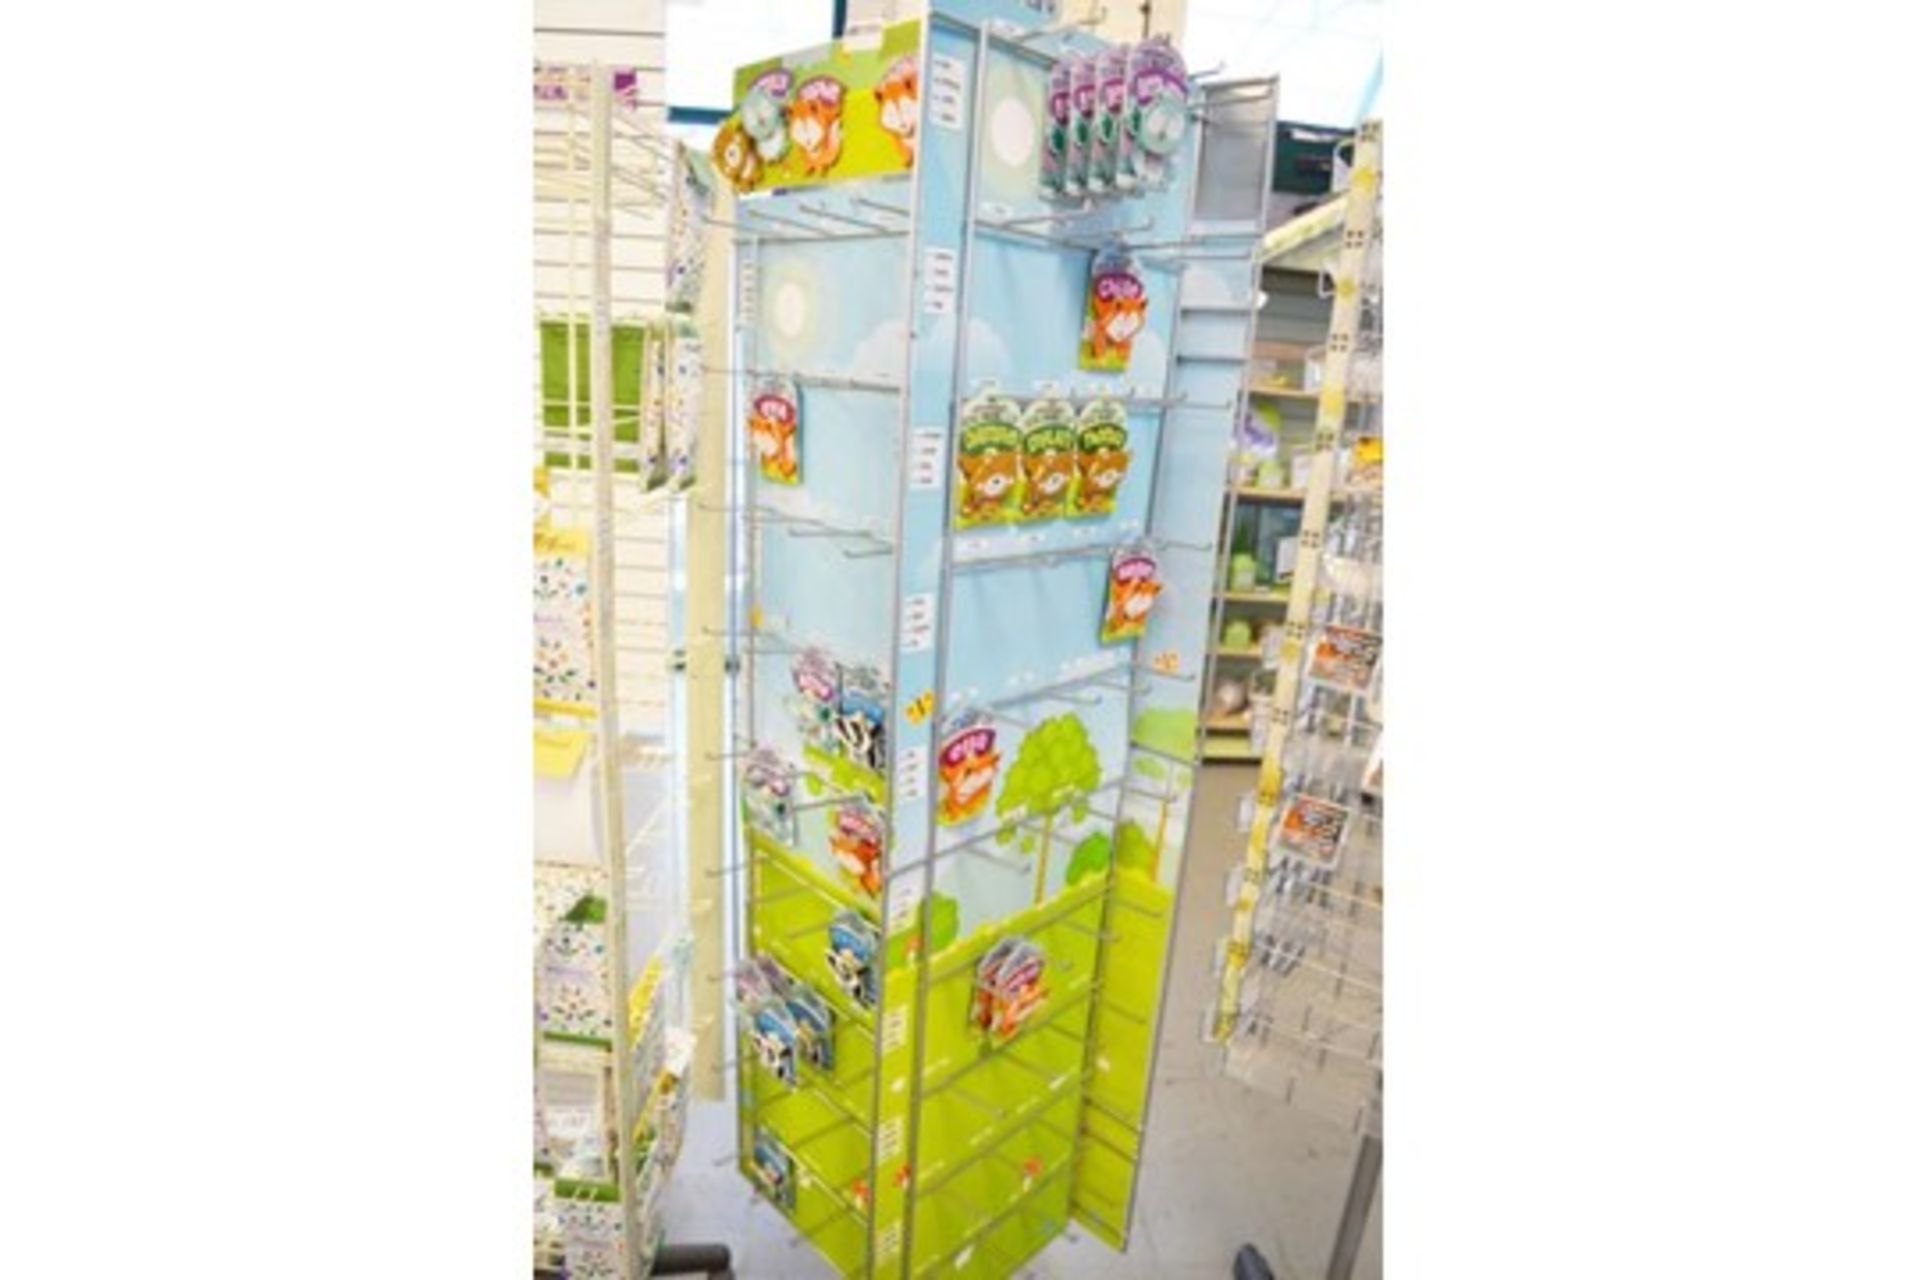 27 x Retail Carousel Display Stands With Approximately 2,800 Items of Resale Stock - Includes - Image 19 of 61